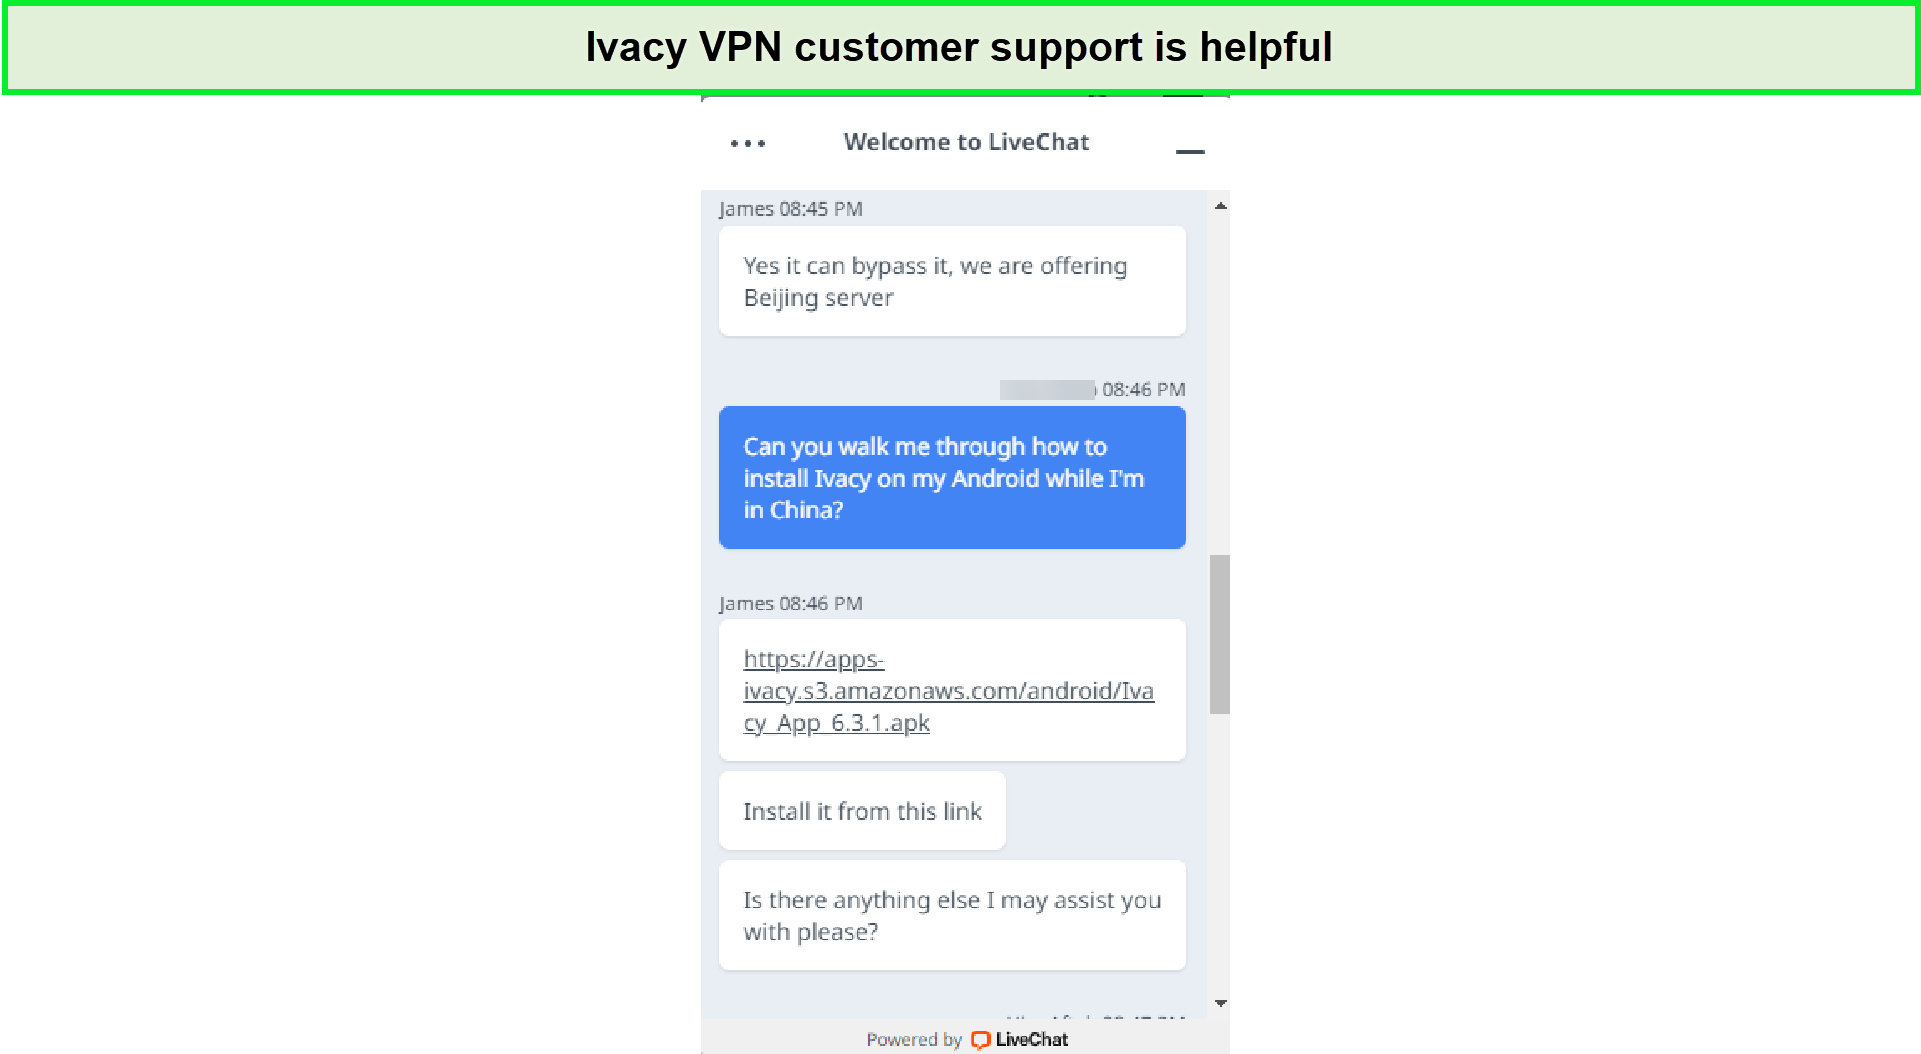 ivacy-customer-support-in-France